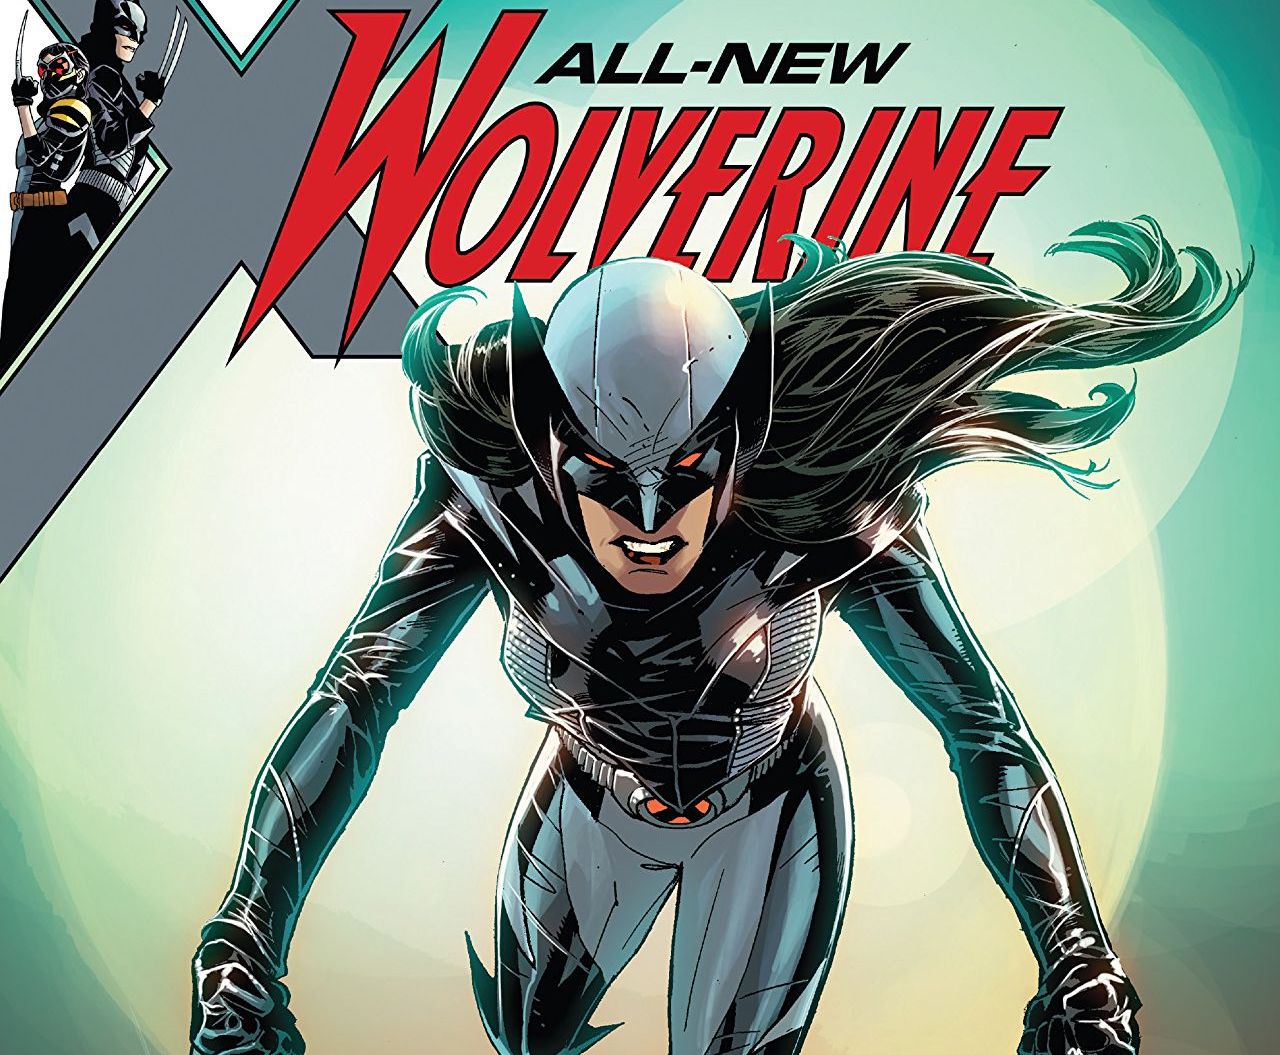 'All-New Wolverine Vol. 4: Immune' review: A story that'll surprise you